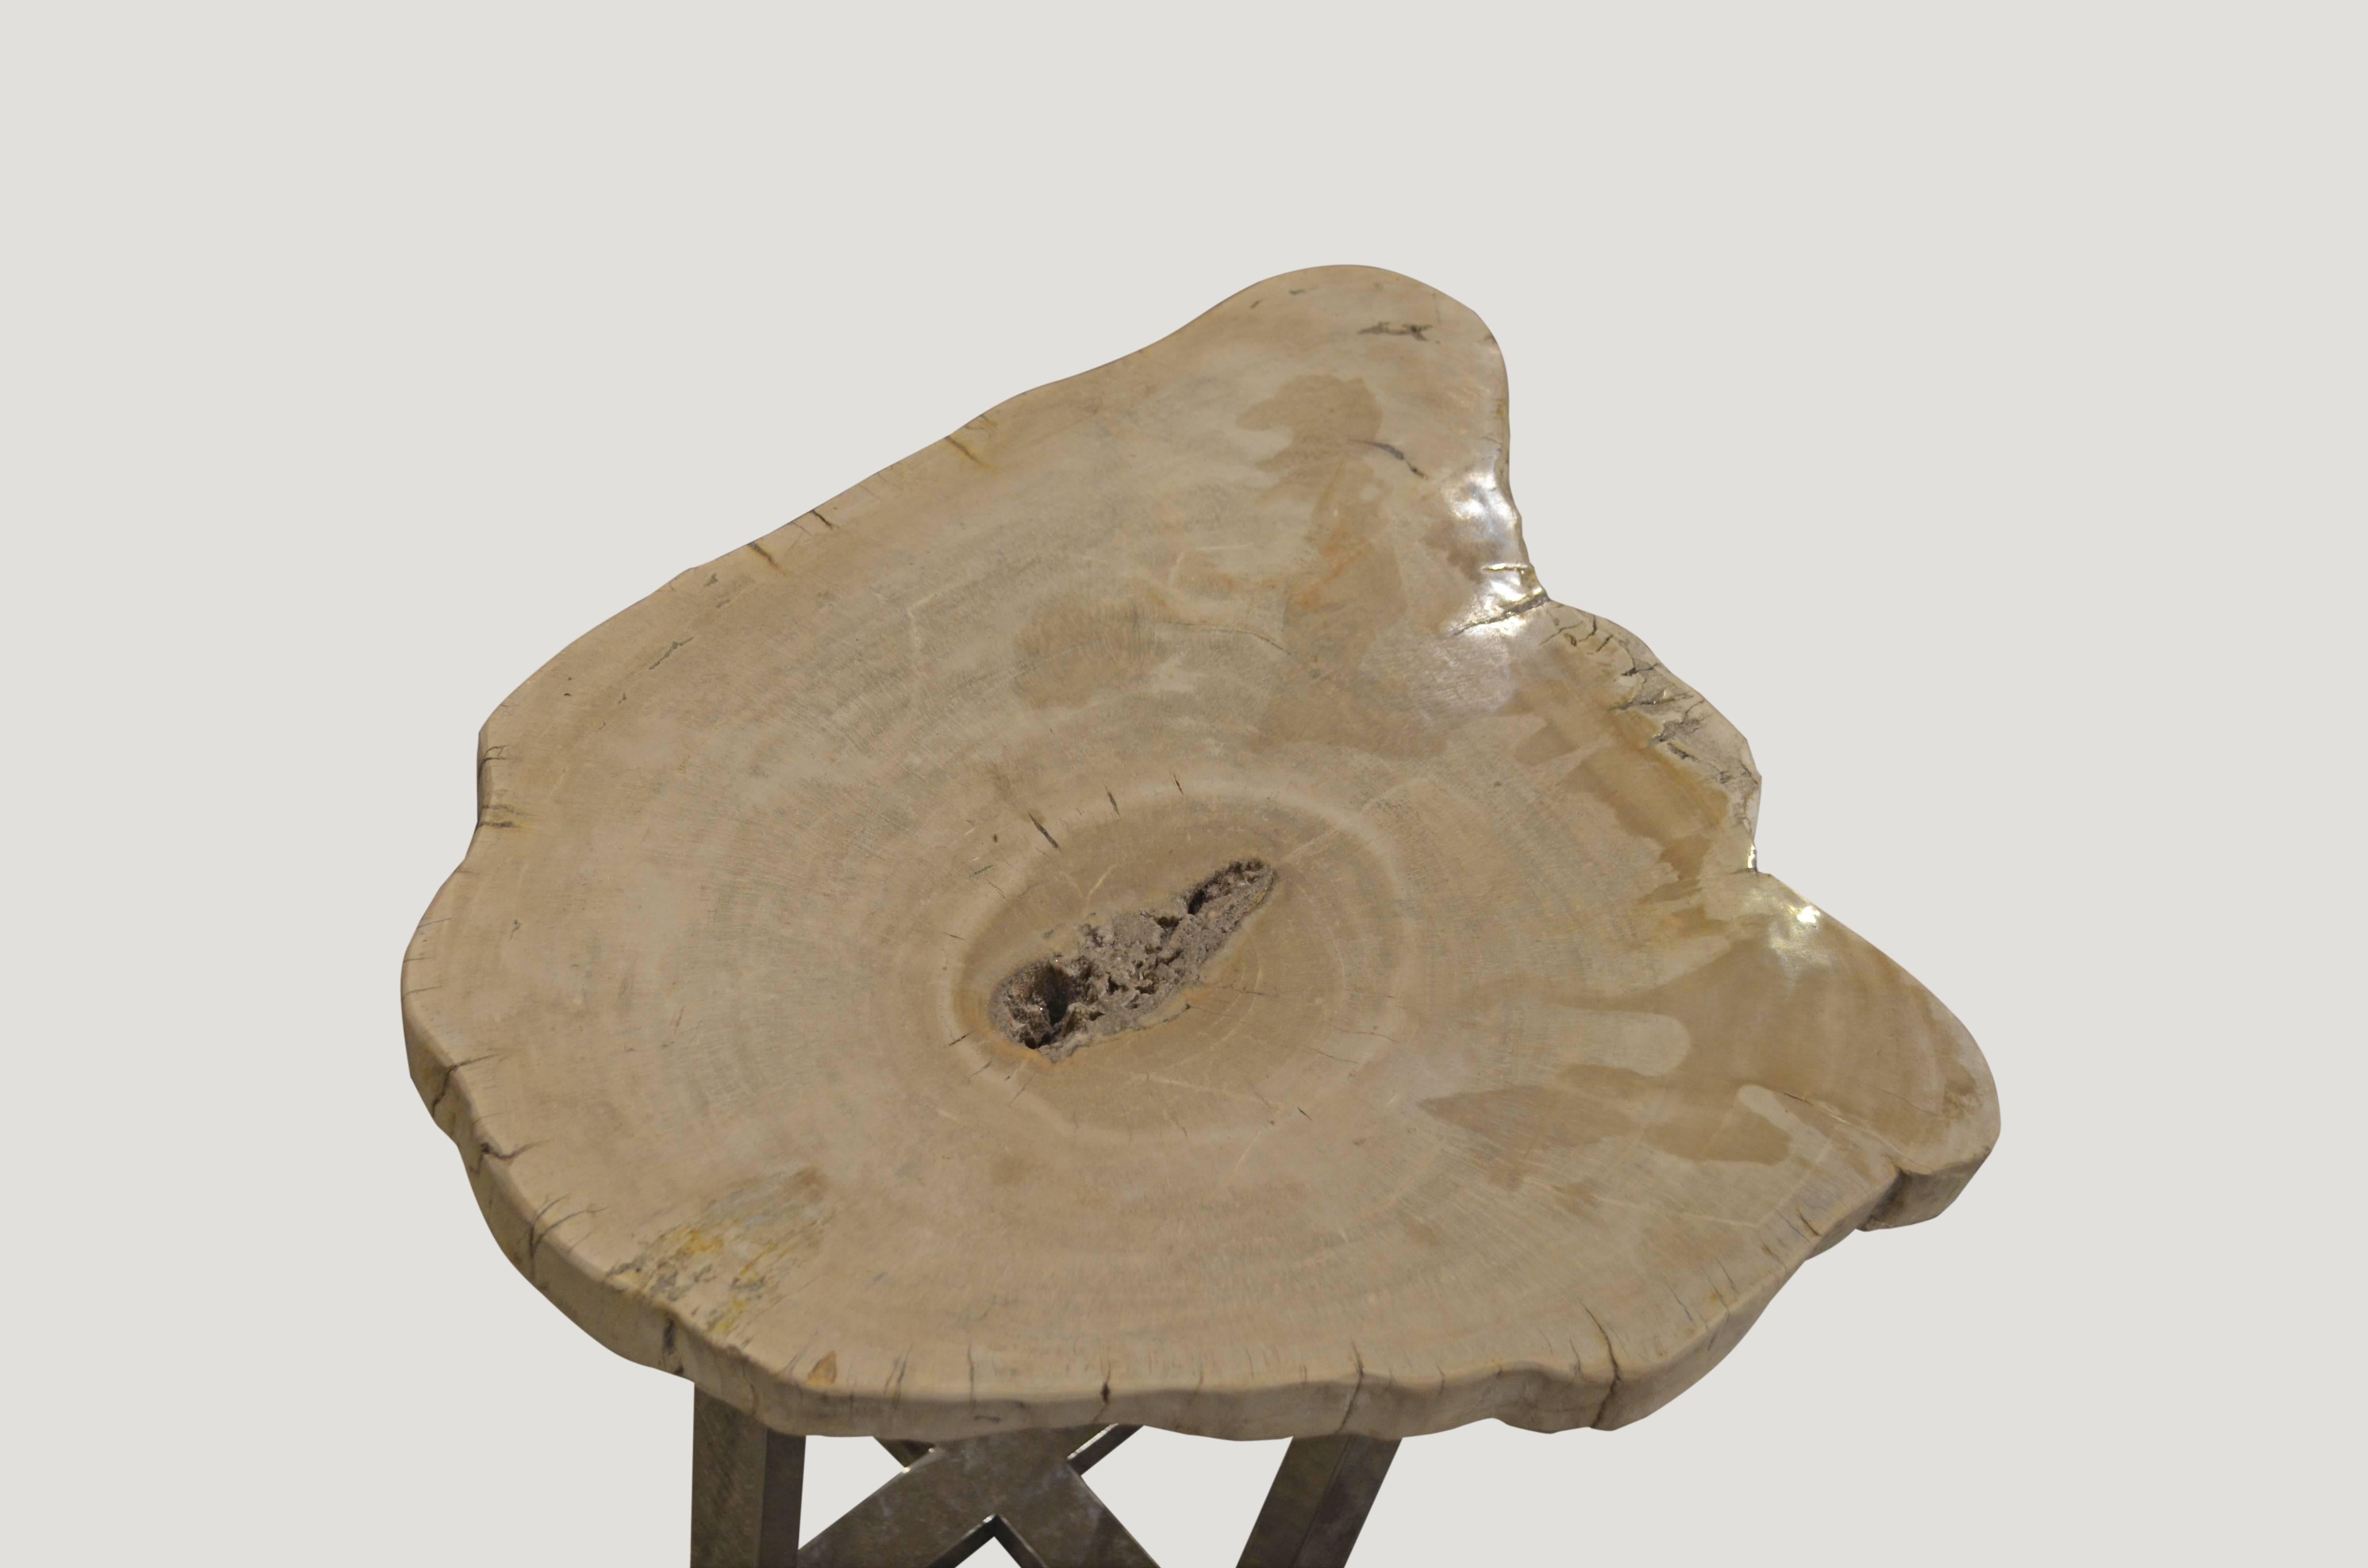 Slab top petrified wood, floating on a stainless steel base. Beautiful crystalized detail in the center.

We source the highest quality petrified wood available. Each piece is hand-selected and highly polished with minimal cracks. Petrified wood is